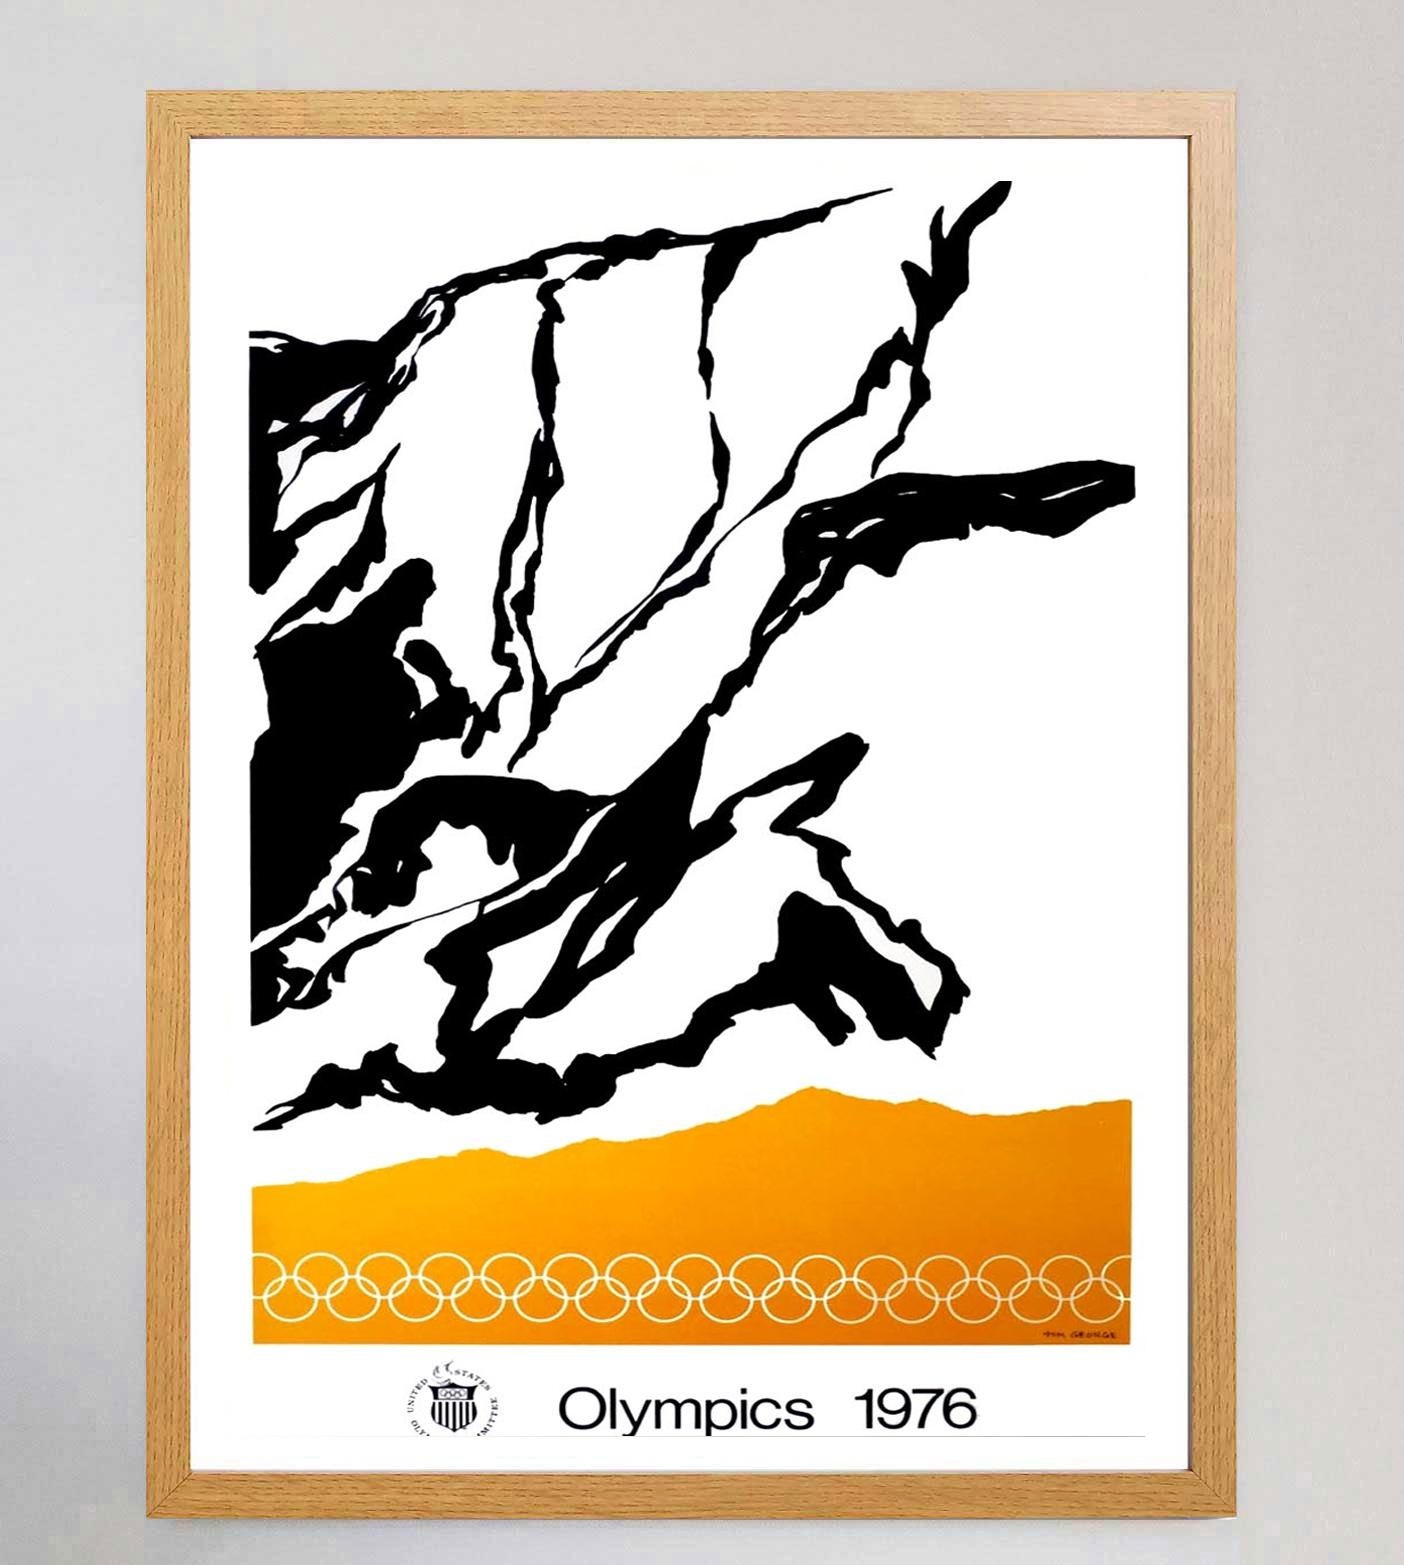 American artist Tom George was one of several artist commissioned to create fine art posters in promotion of the 1976 Montreal Summer Olympic Games. The games, the first and only Summer games to be held in Canada, was won by the Soviet Union, with